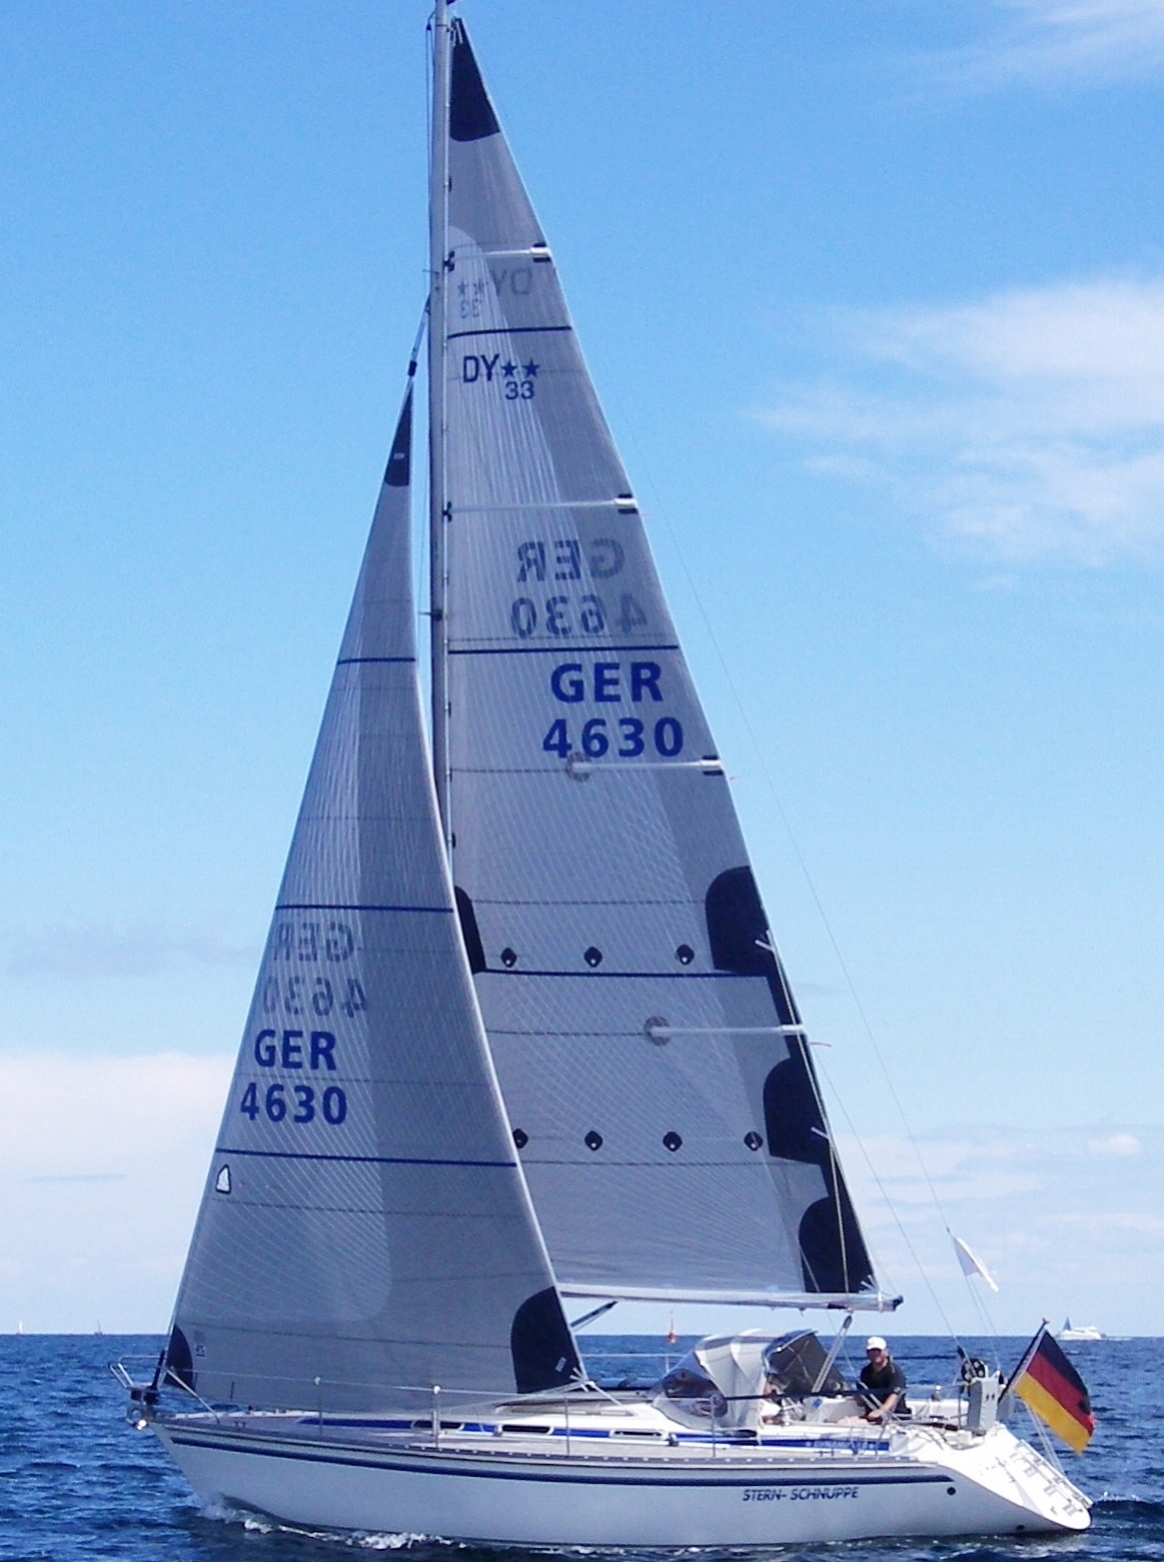 The genoa shown above has taffeta on the part of the sail overlapping the mast to protect the reinforcing fibers and the sail's mylar layer. This boat's mainsail also has a partial taffeta layer up the whole leech.